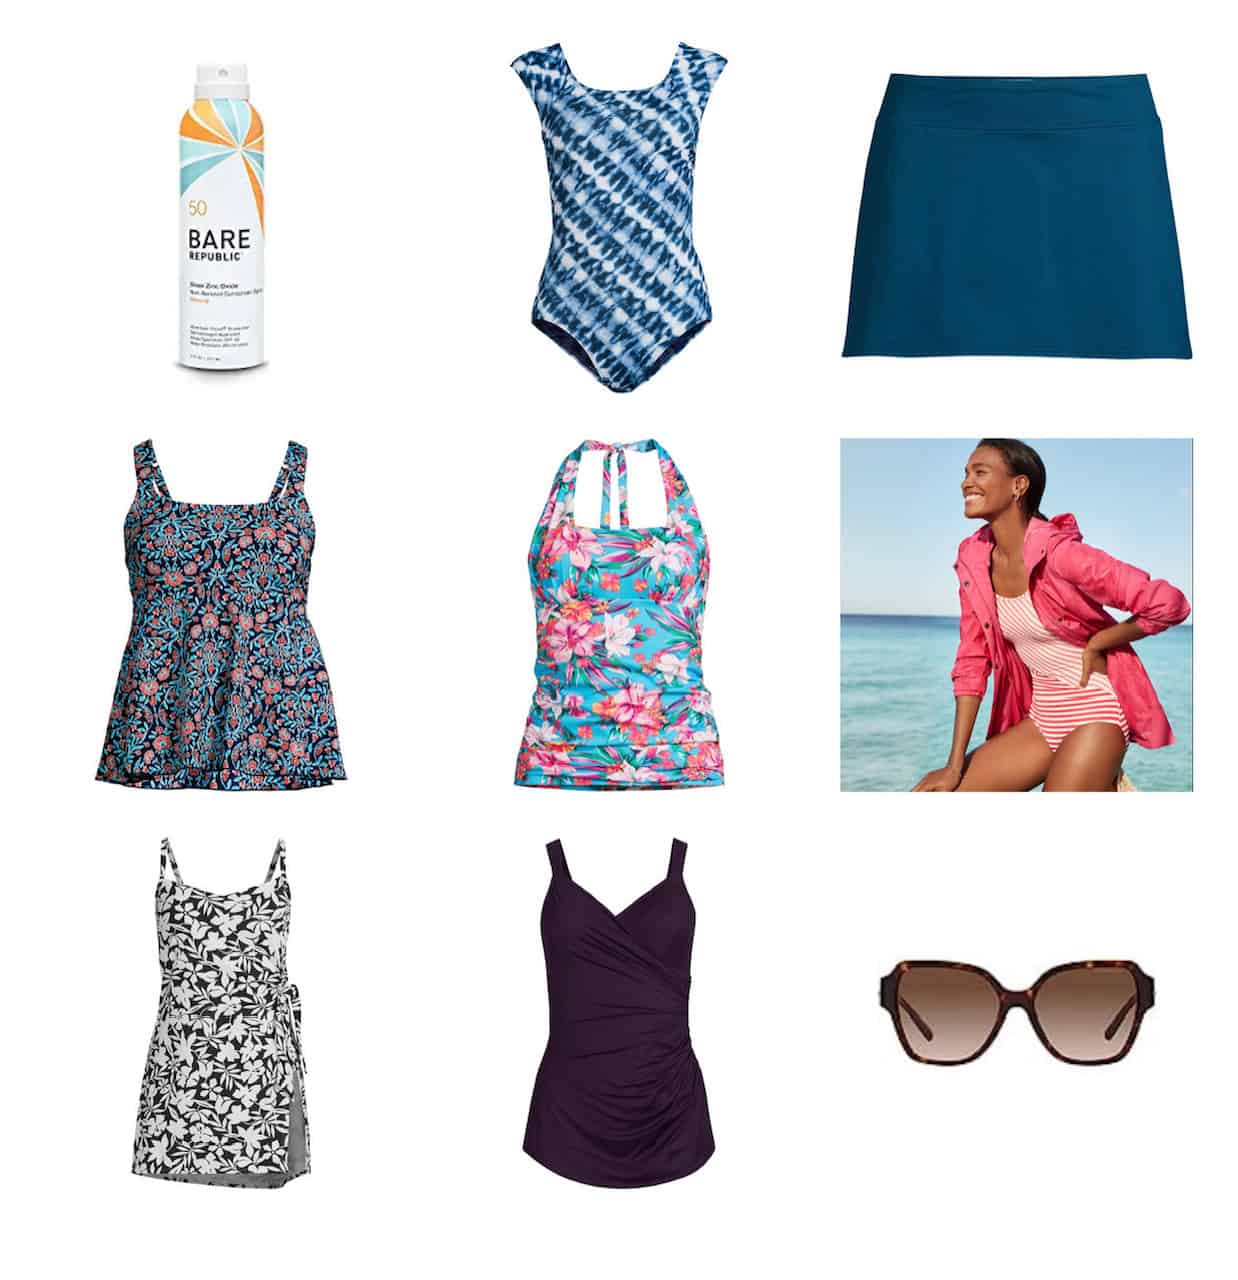 Where to Shop for Beautiful, Full Coverage Swimwear For Moms